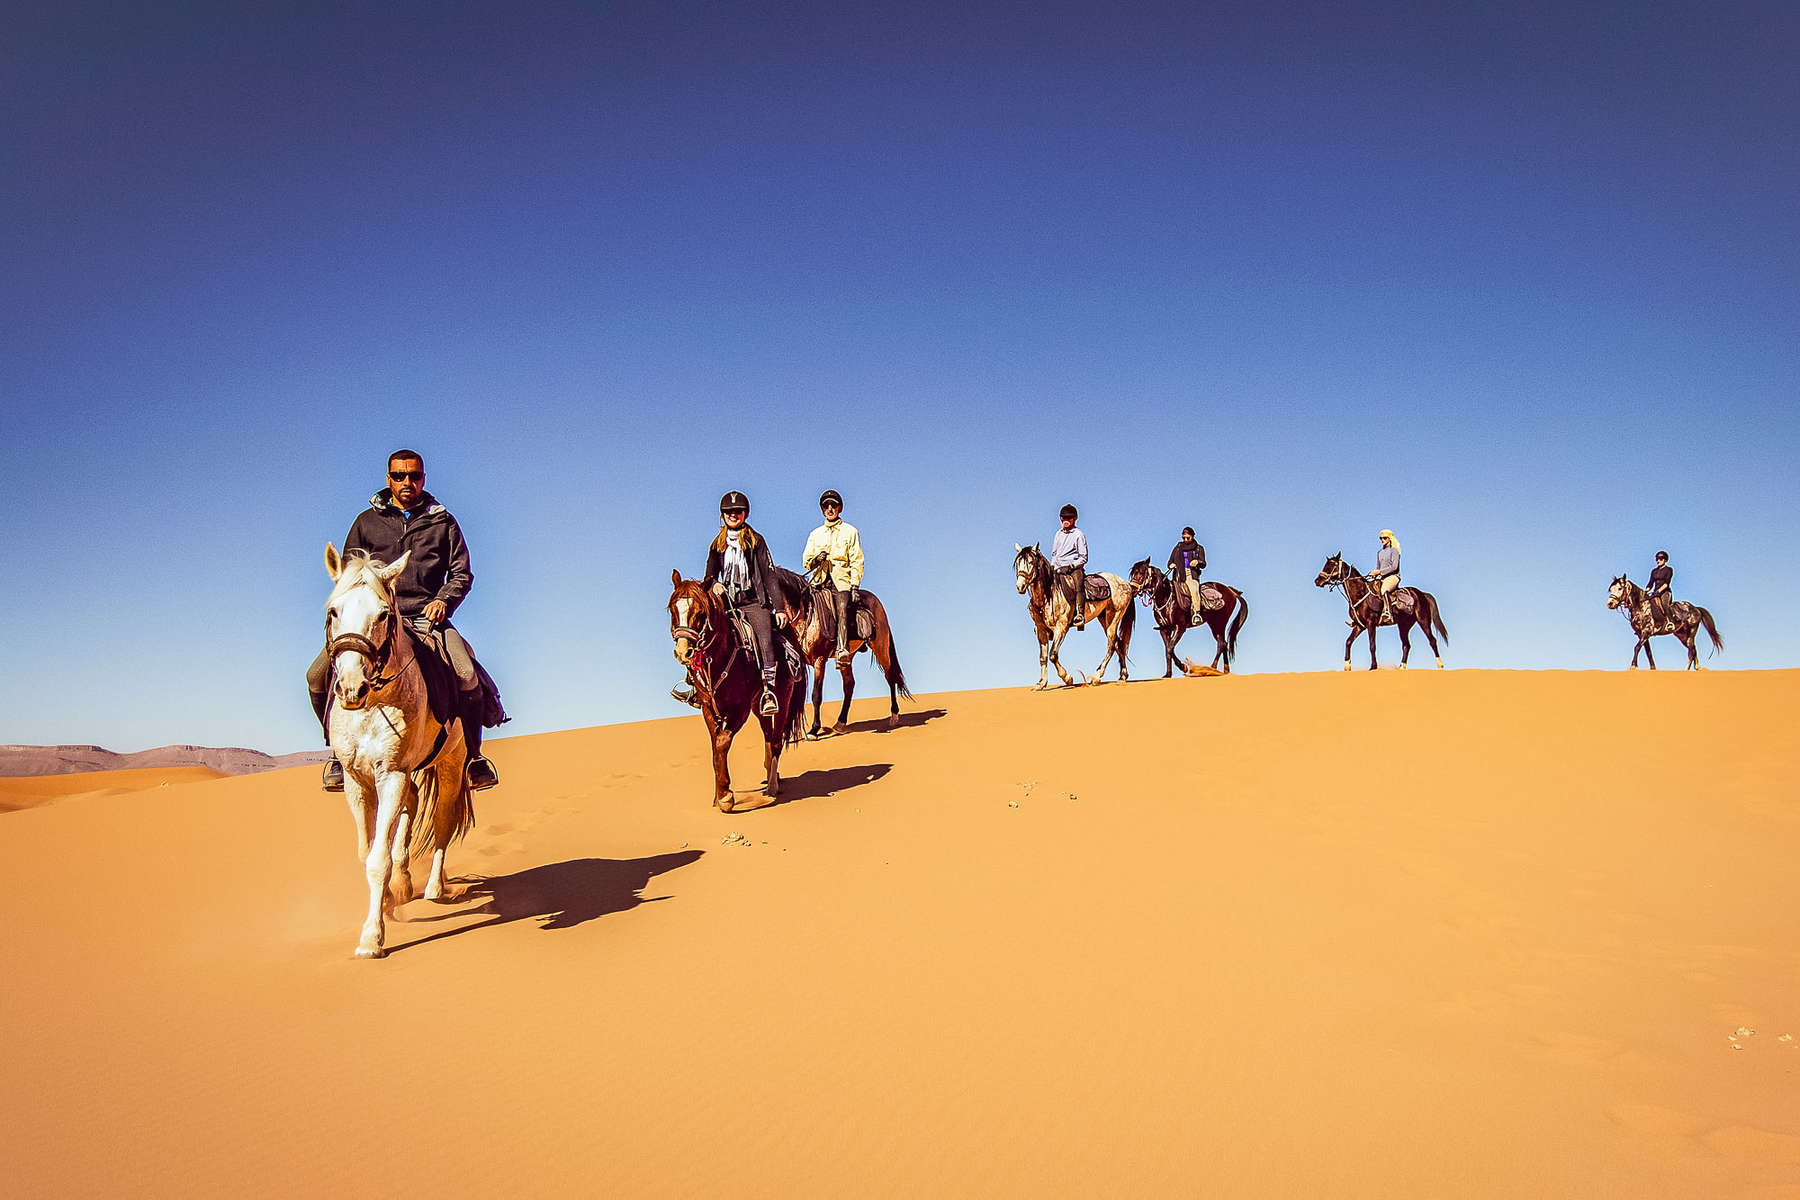 Riders riding in a single line on a sand dune in the Sahara